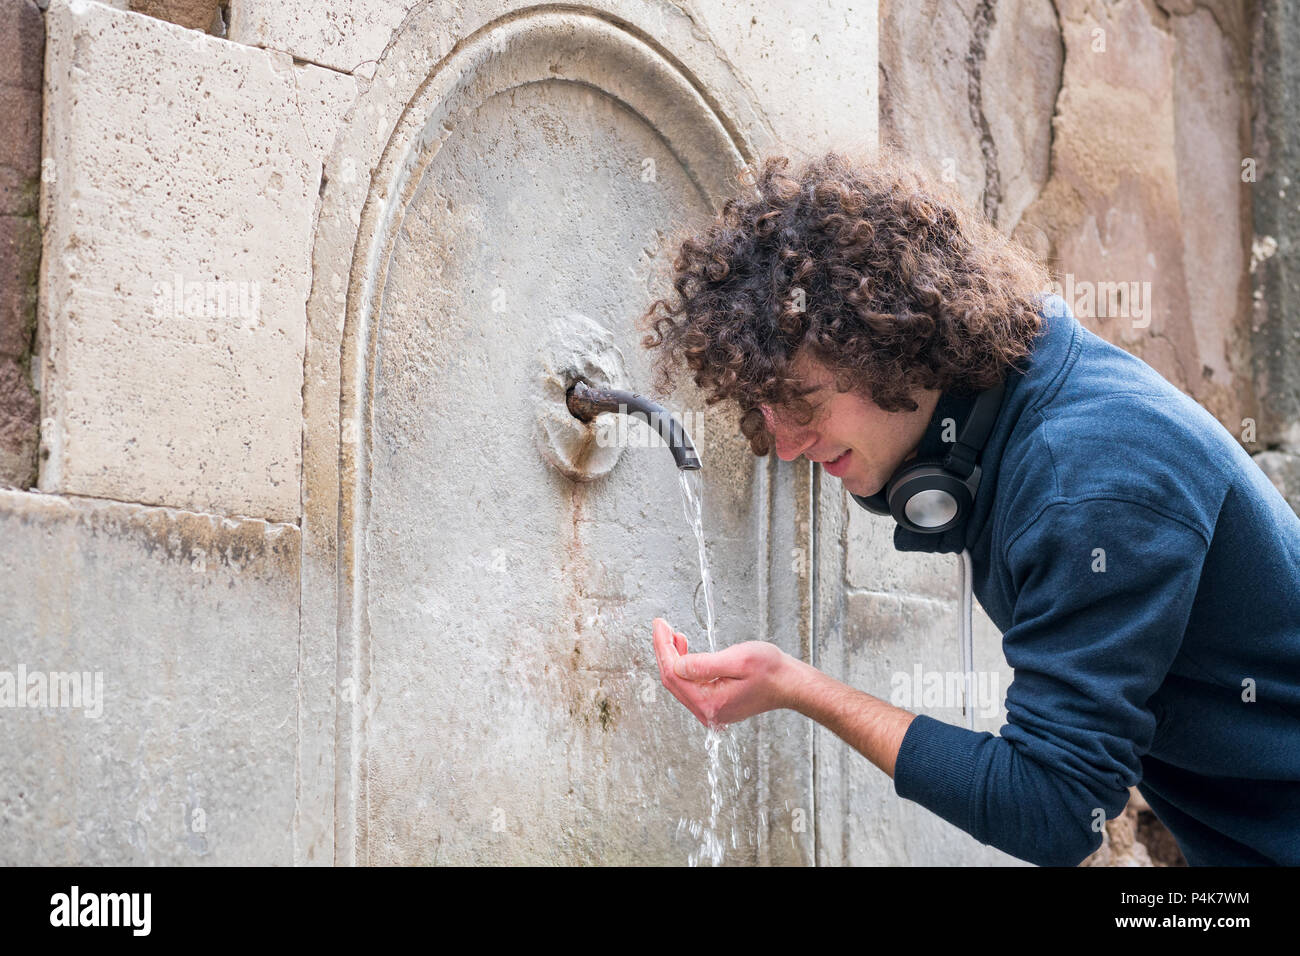 Pretty young man with curly hair drinking water from a fountain Stock Photo